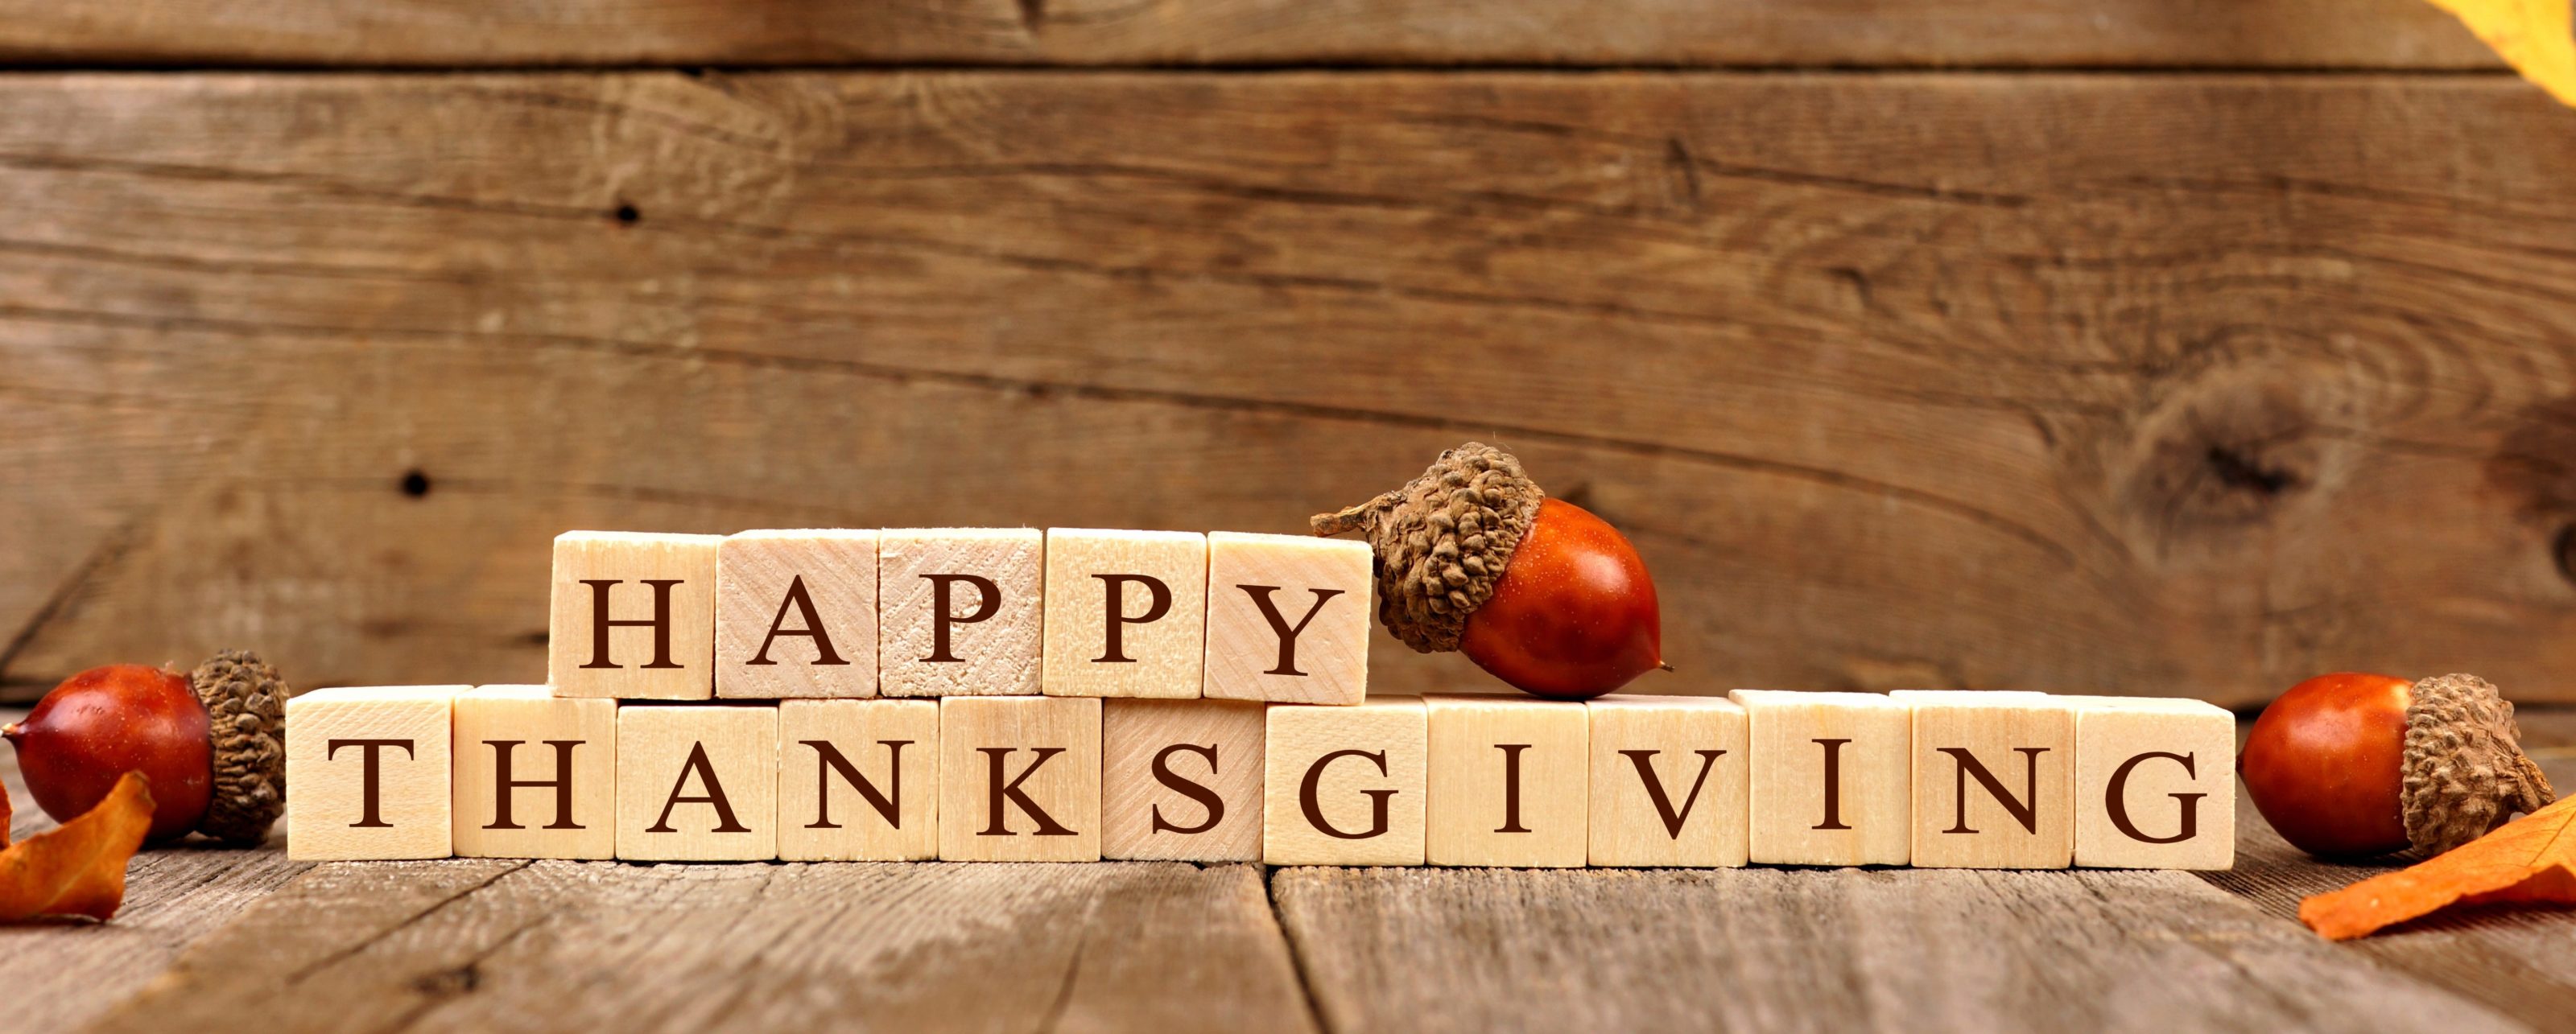 Happy Thanksgiving Wooden Blocks Against A Rustic Wood Background